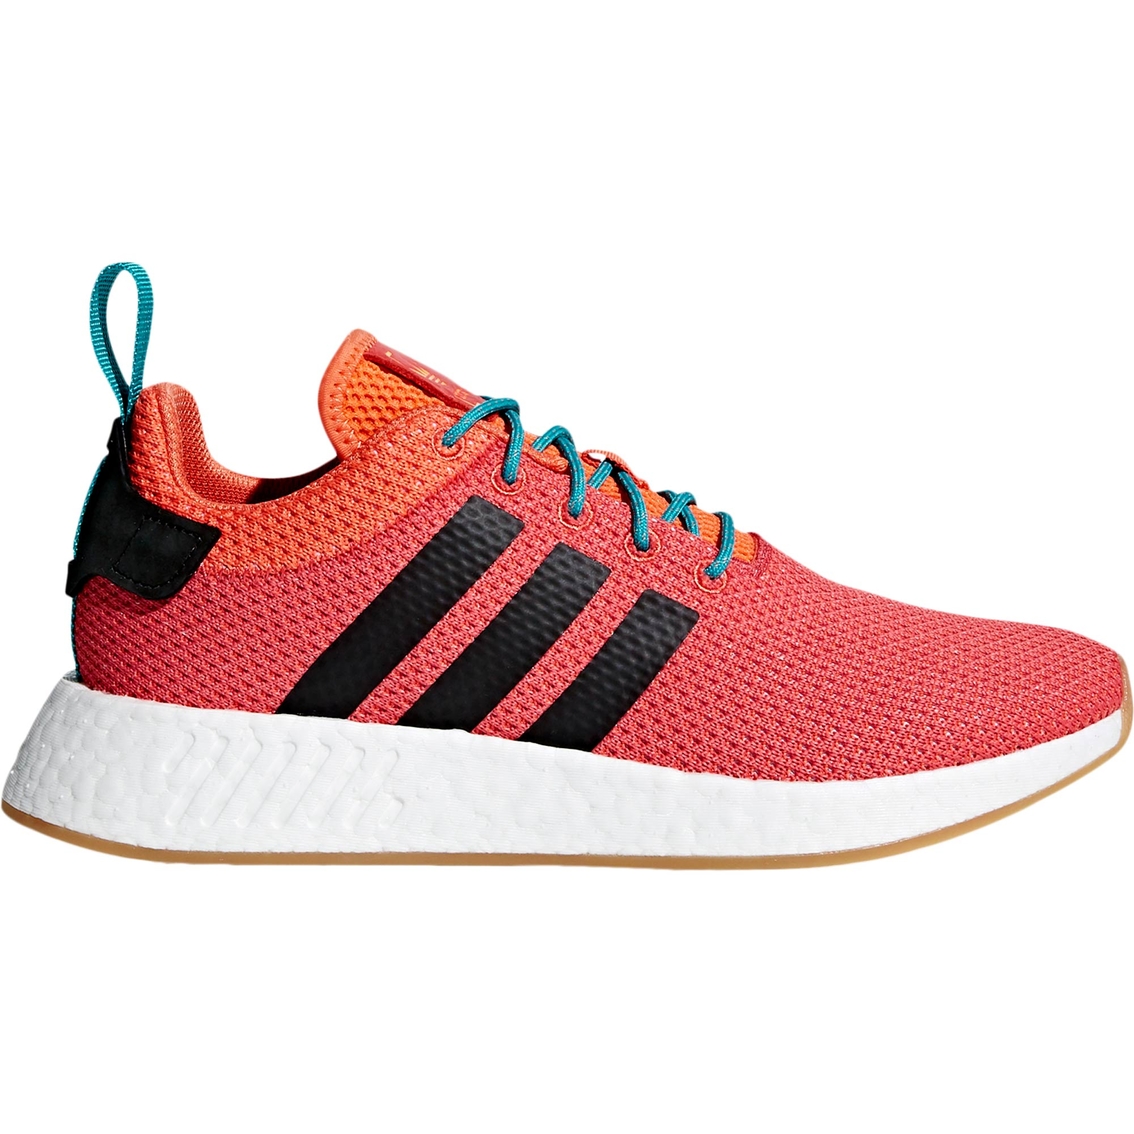 Adidas Women's Nmd Rd 2 Shoes | Sneakers | Shoes | The Exchange